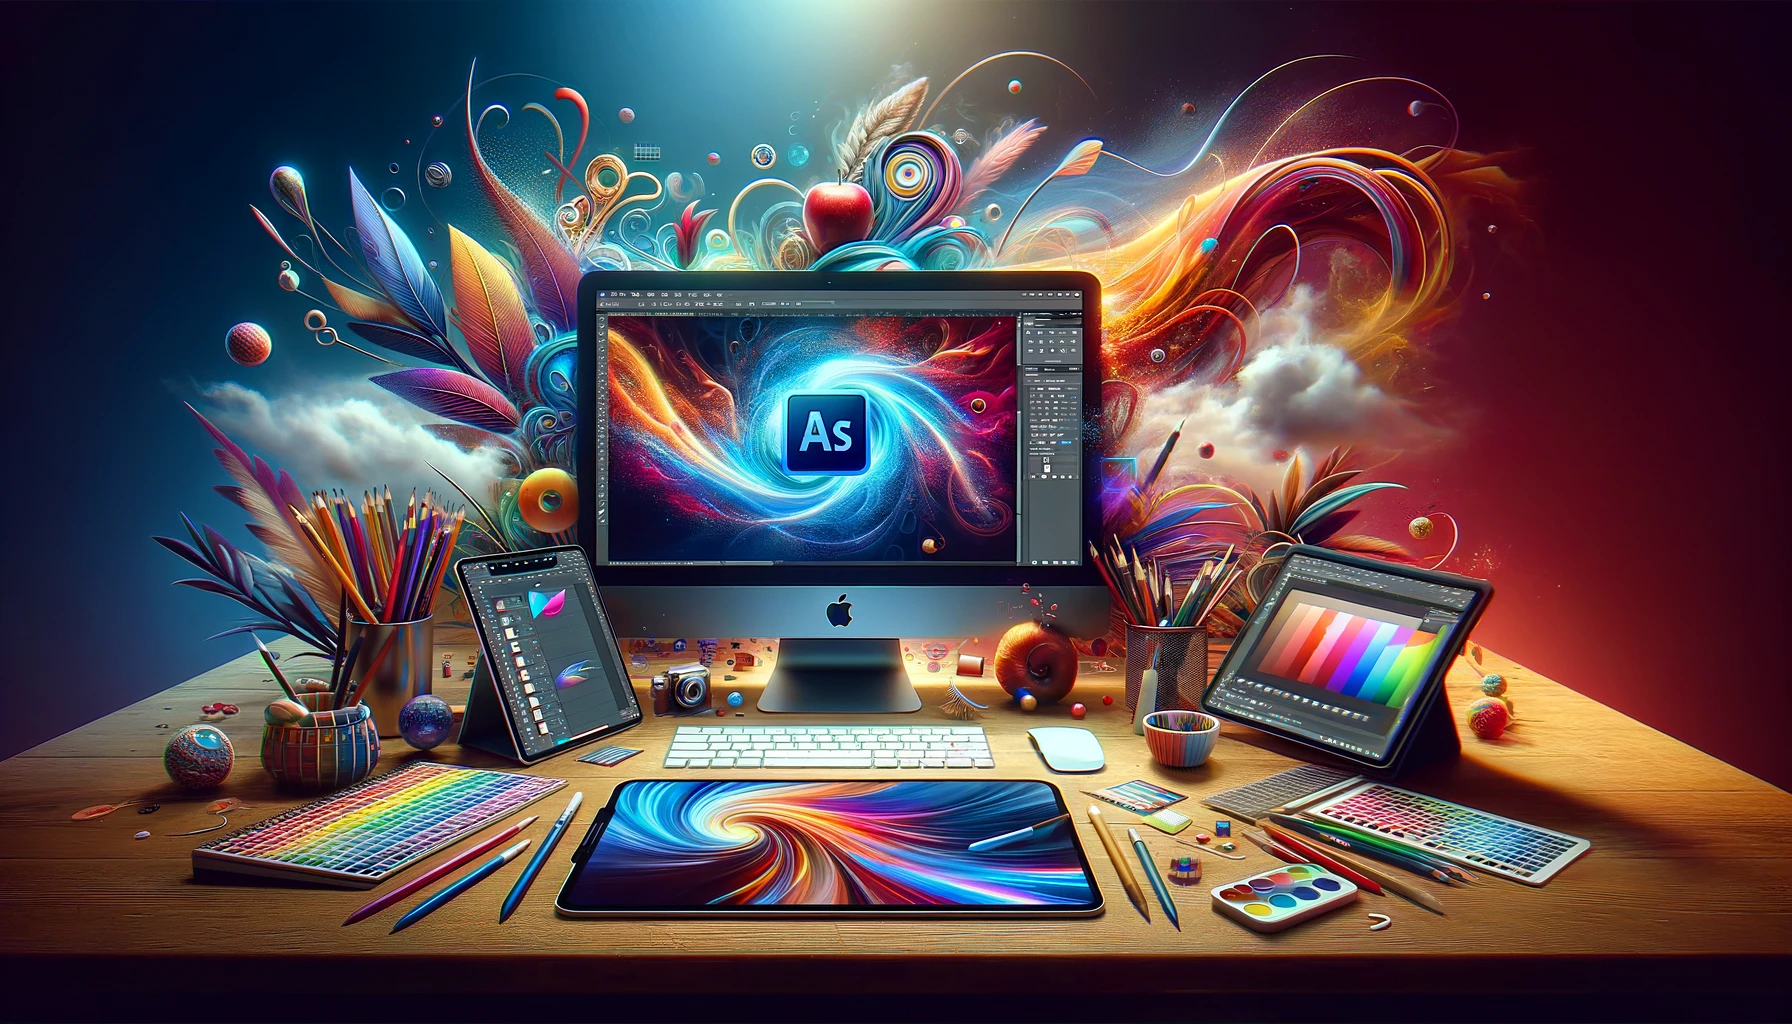 Creative Spot - Apple fighting to win back Adobe users